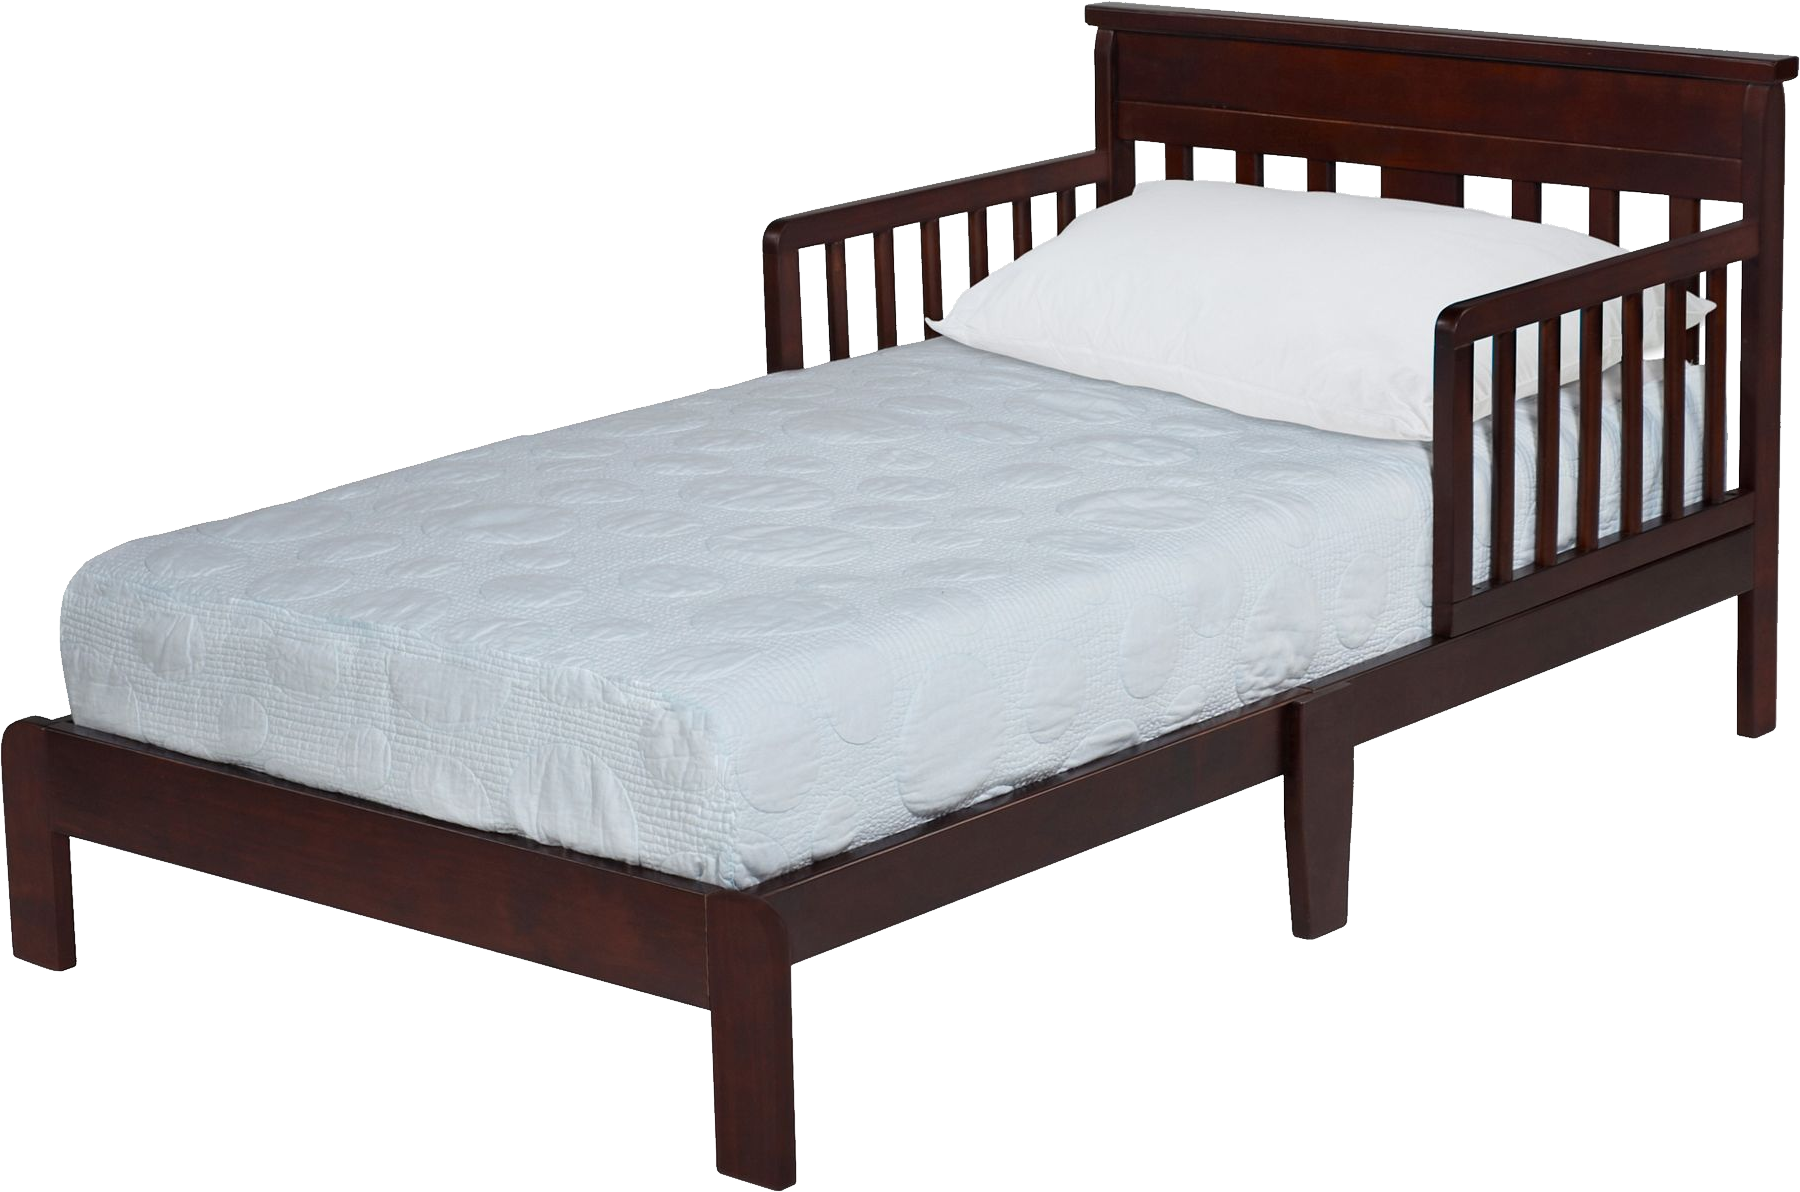 student bed and mattress